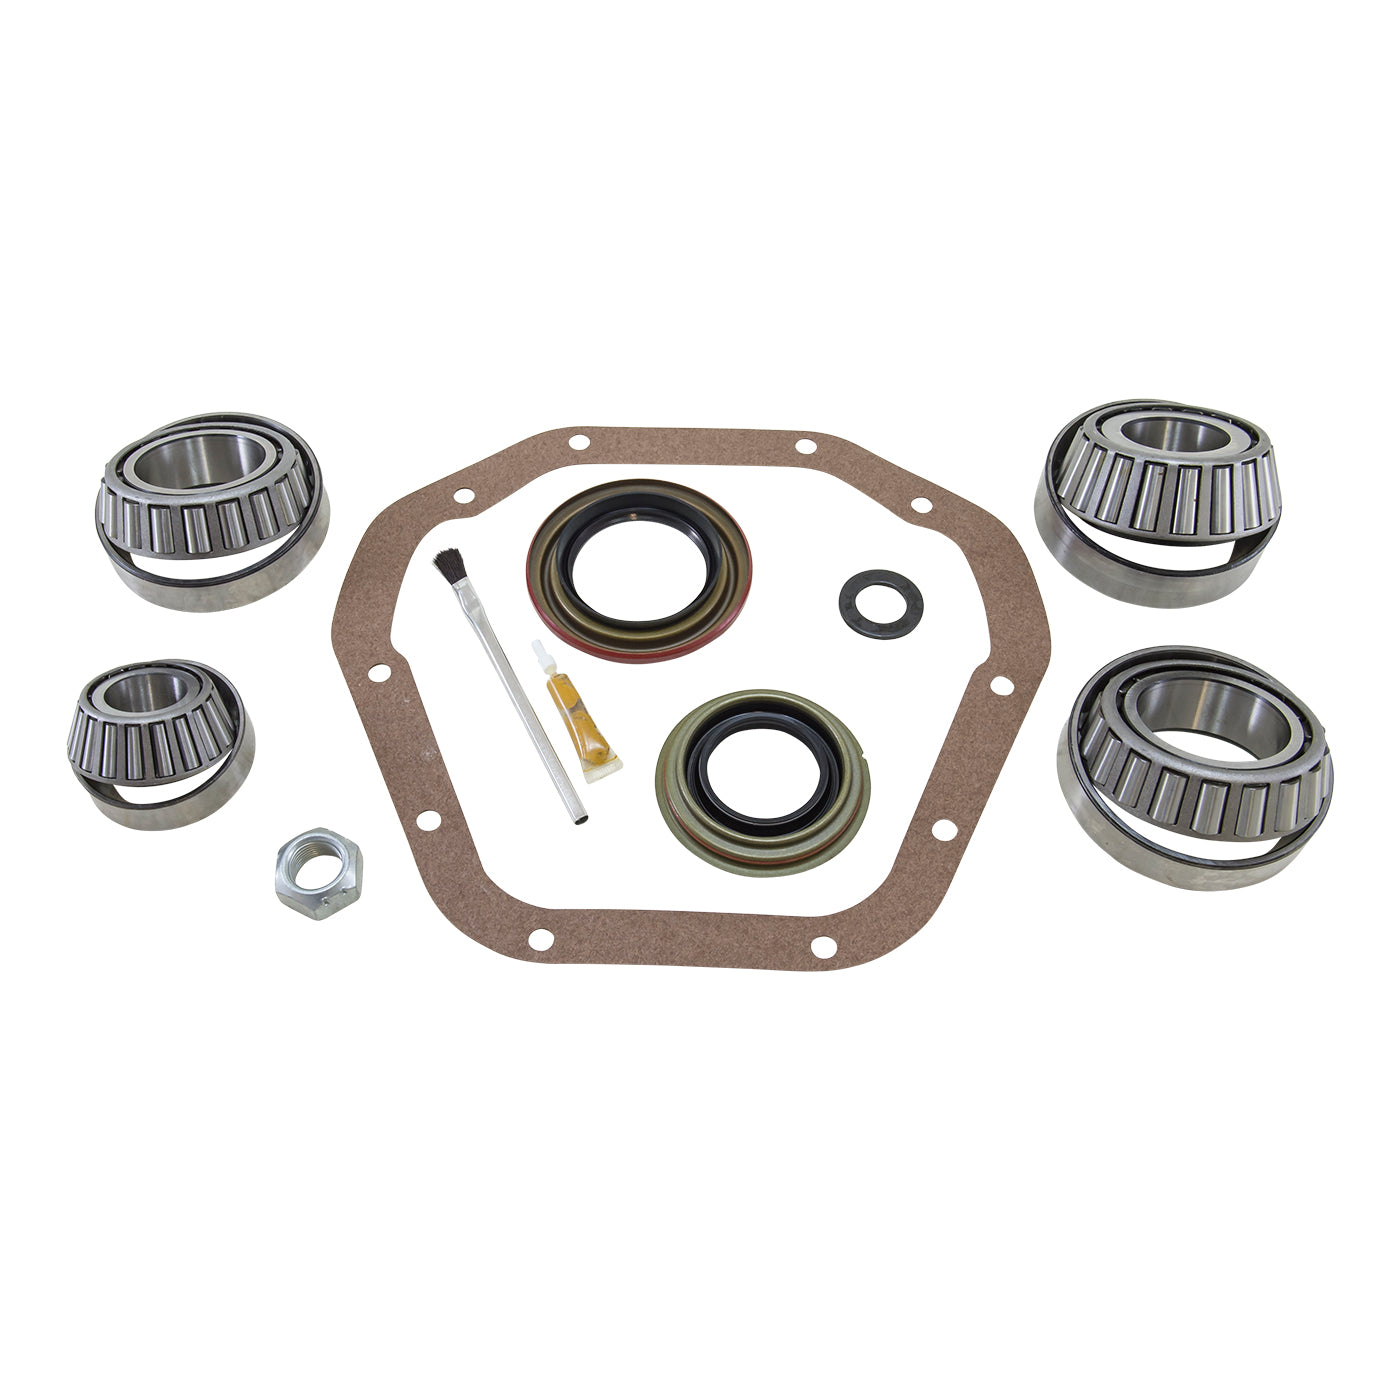 Yukon Gear Bearing install kit for '08-'10 Ford 10.5" differential BK F10.5-C